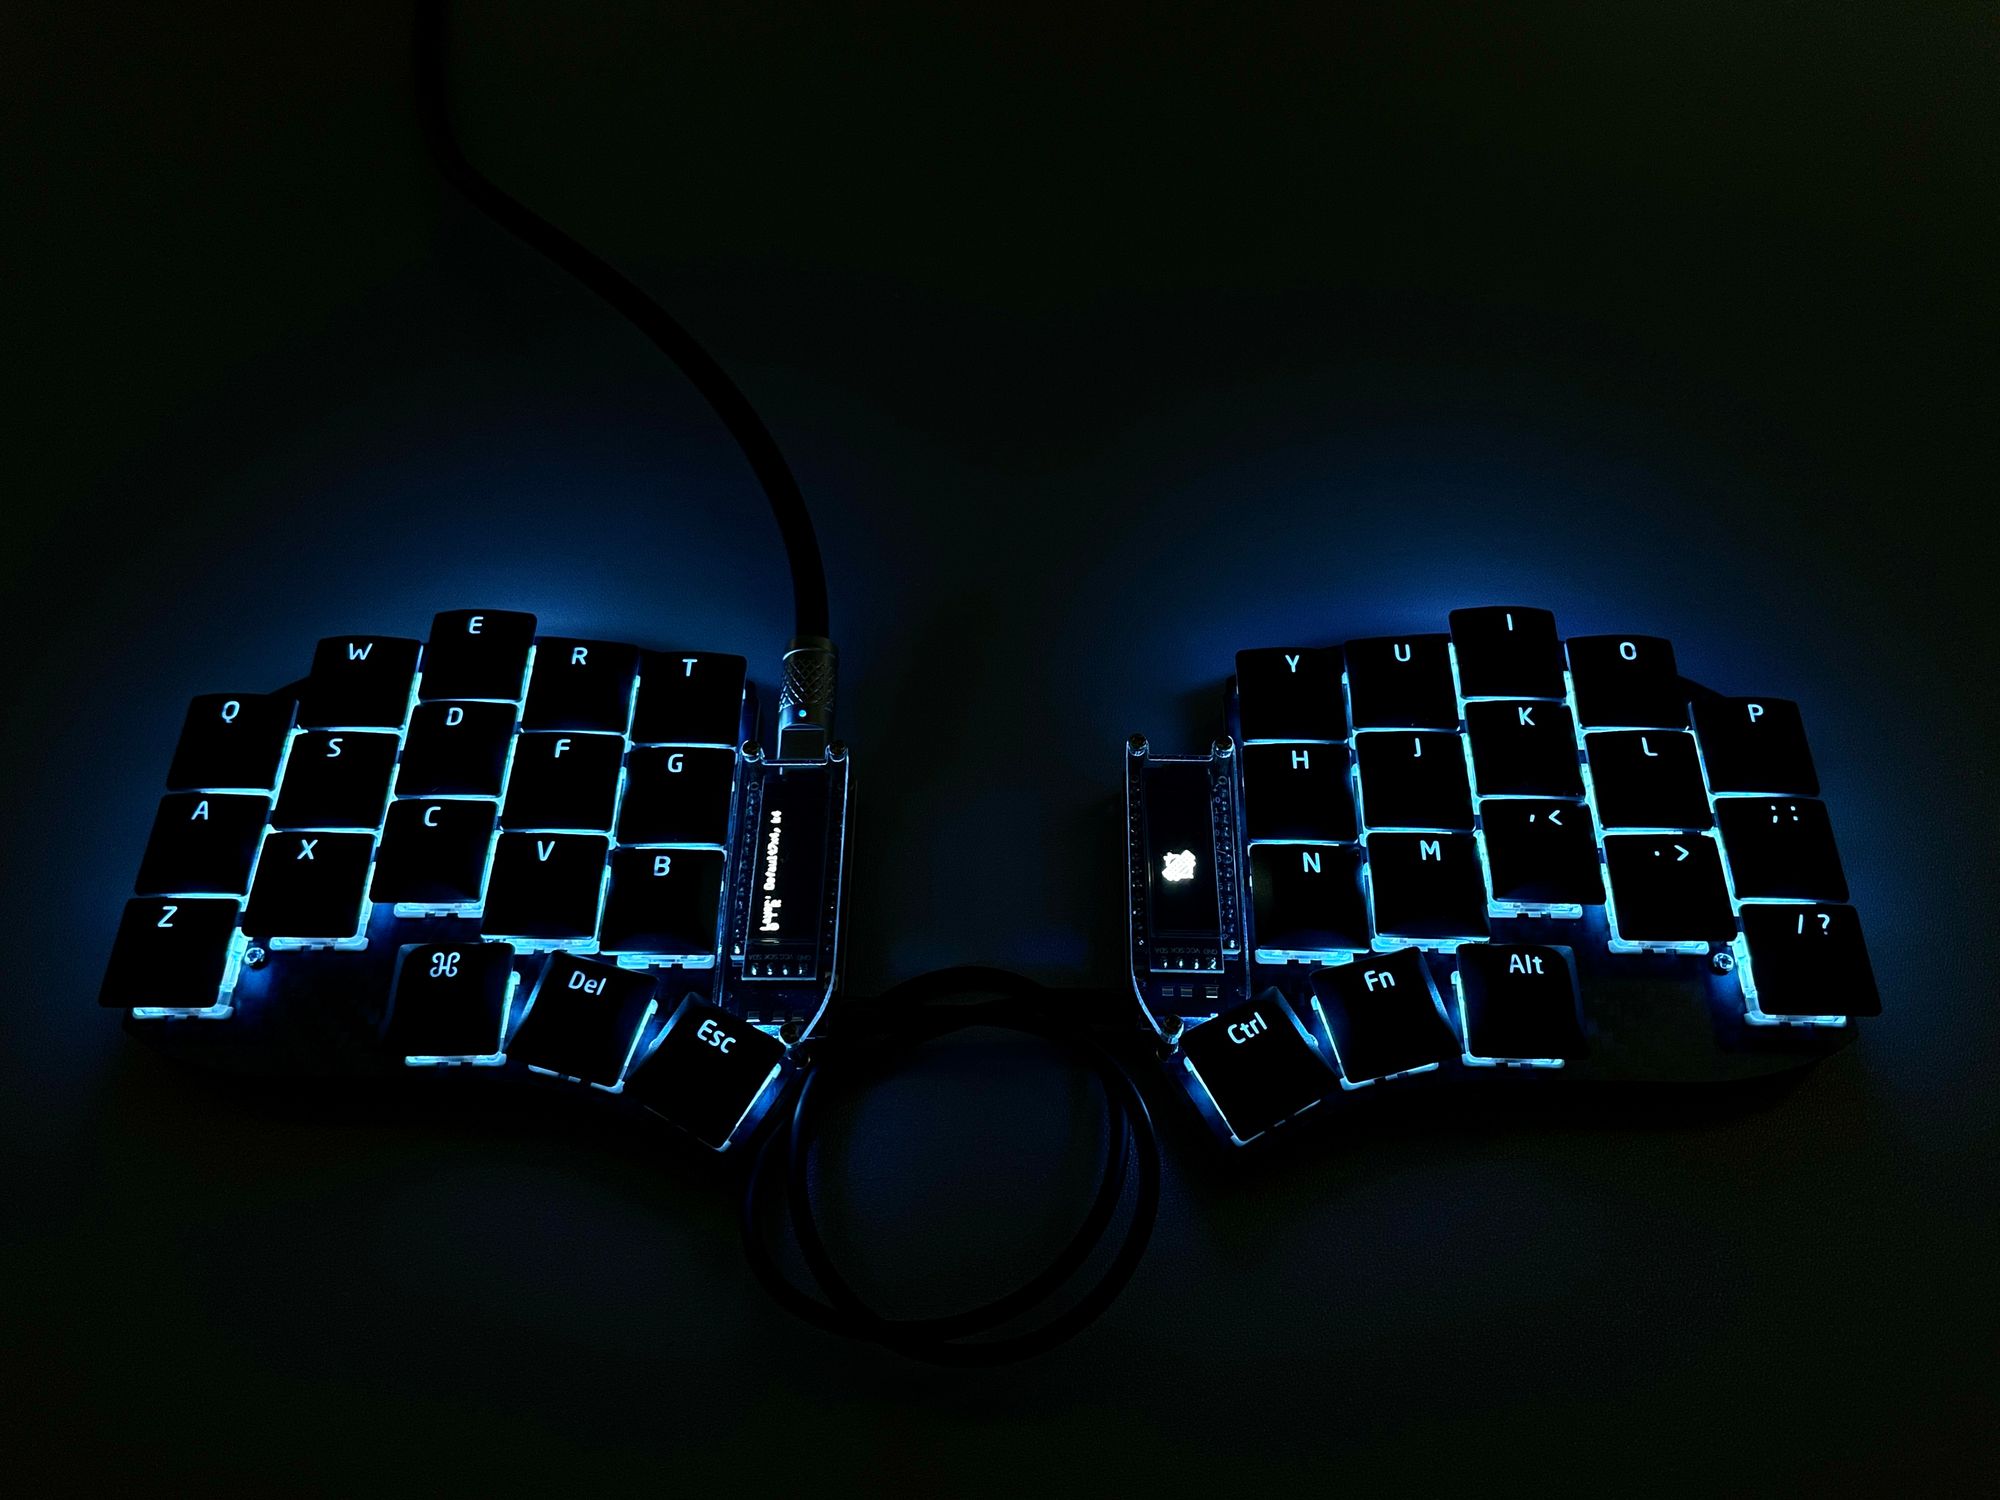 Swoop Keyboard with RGB LEDs glowing in the dark